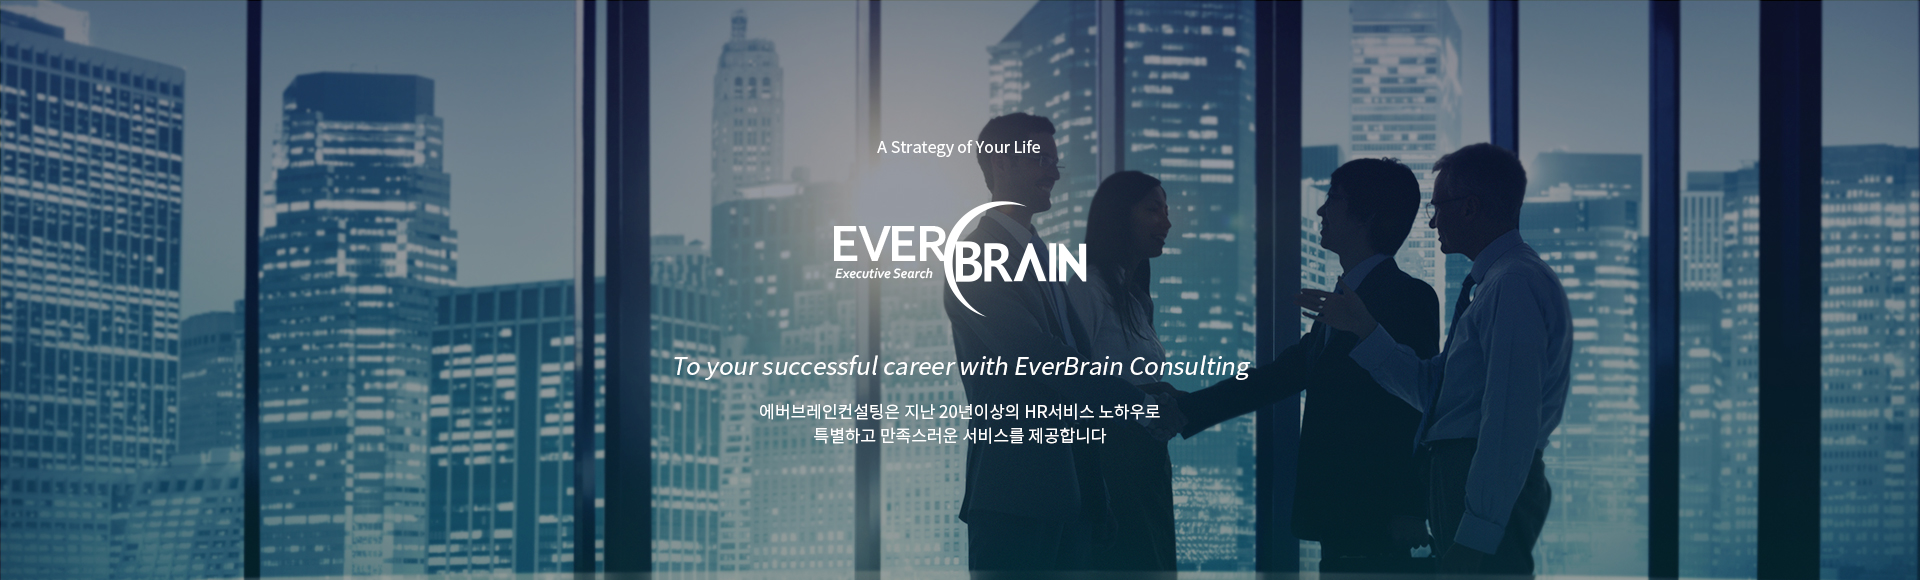 A Strategy of Your Life, EVERBRAIN. 에버브레인컨설팅은 지난 20년의 HR서비스 노하우로 특별하고 만족스러운 서비스를 제공합니다. To your successful career with EverBrain Consulting.